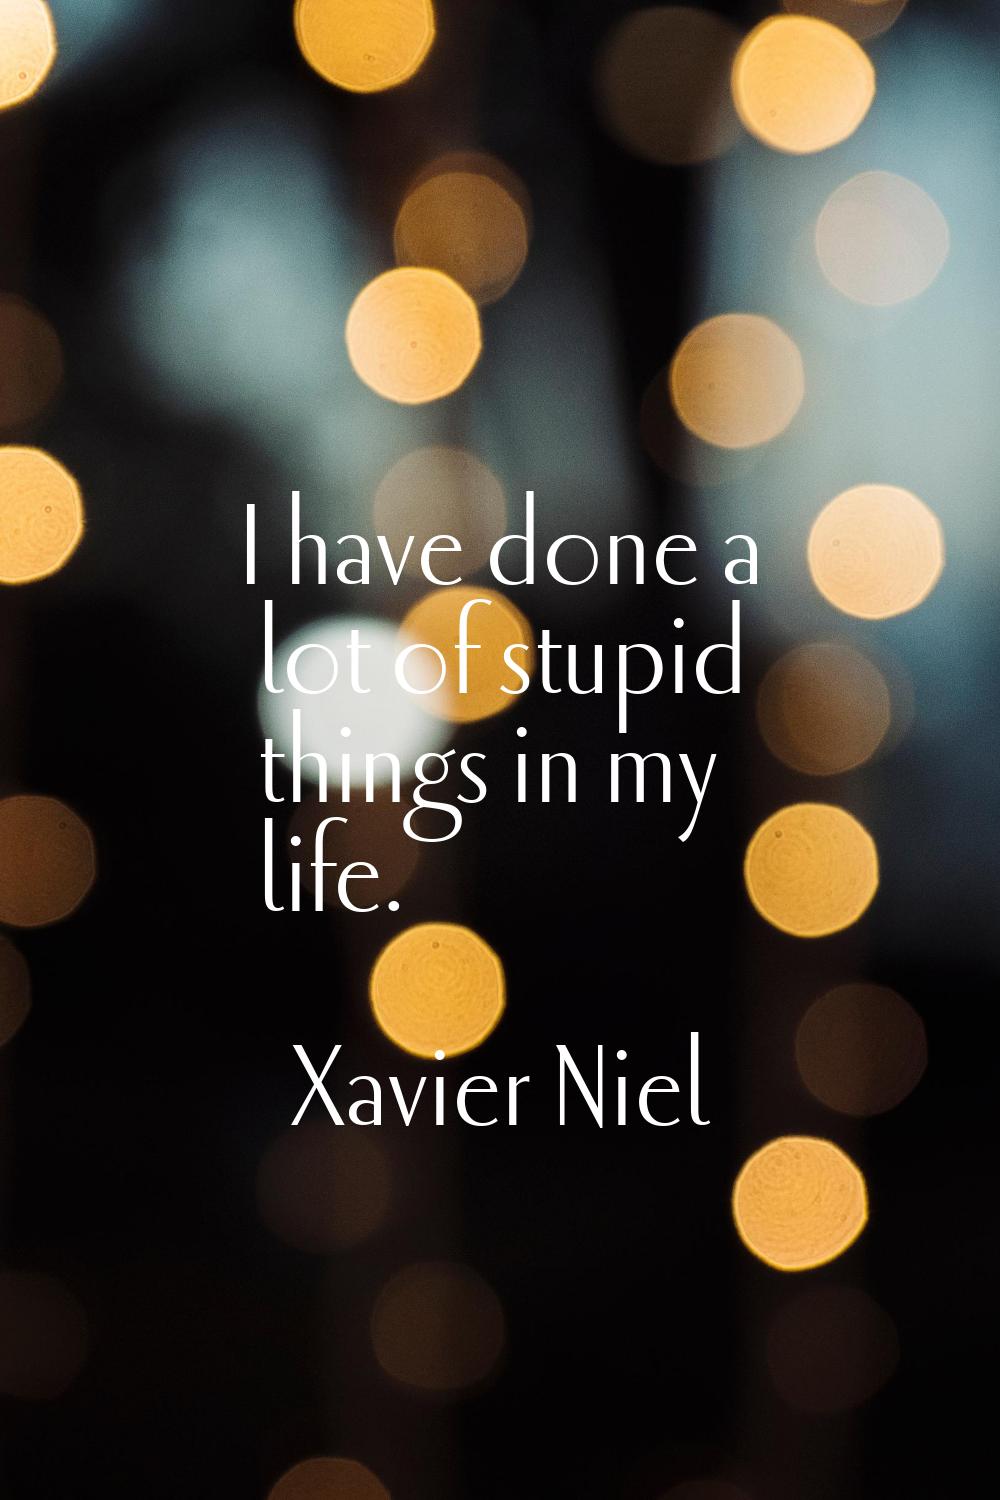 I have done a lot of stupid things in my life.